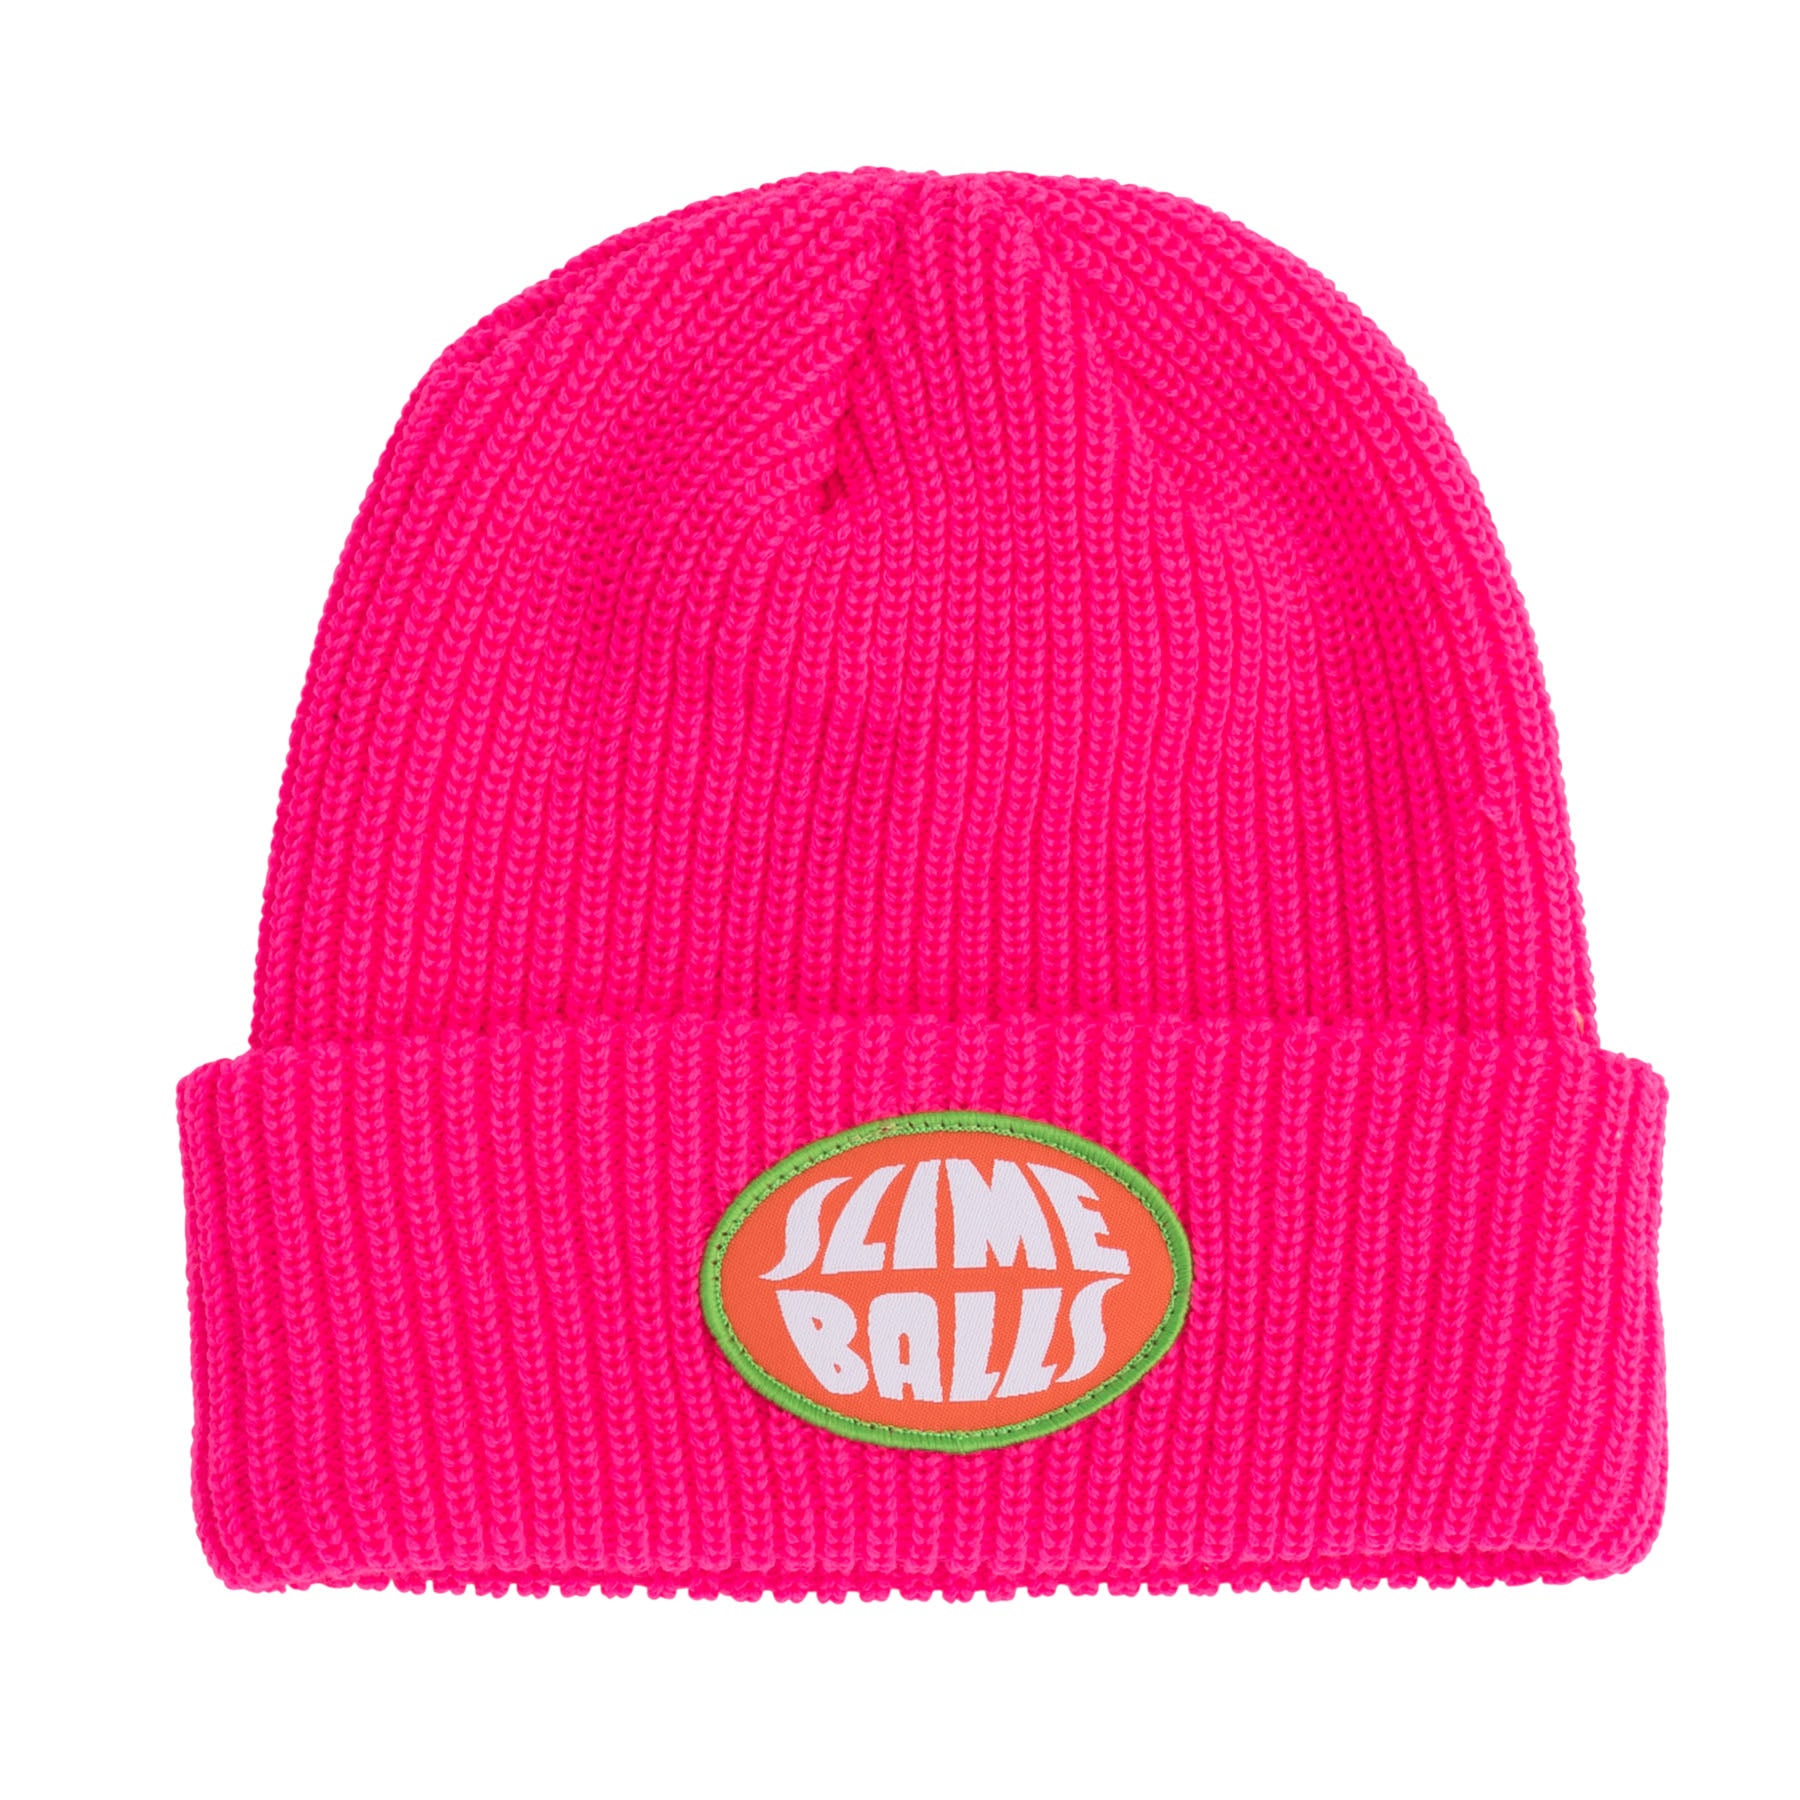 Slime Balls Oval Beanie Long Shoreman Hat Pink - Invisible Board Shop